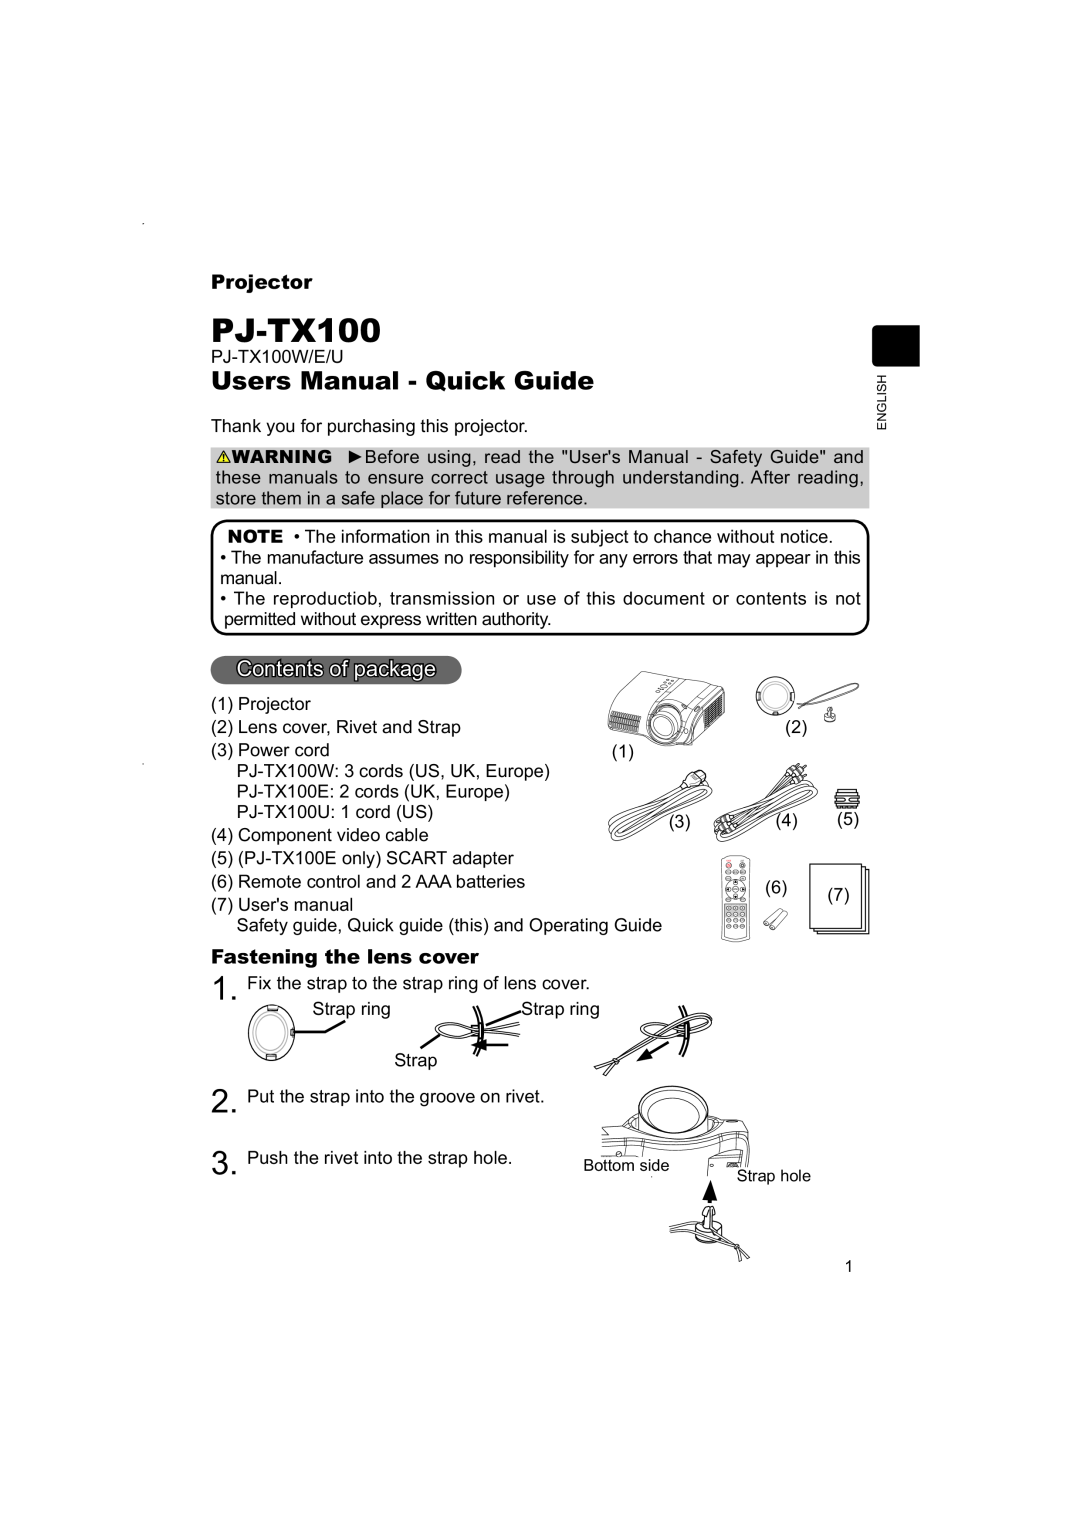 Hitachi PJ-TX100 user manual Users Manual - Quick Guide, Contents of package, Fastening the lens cover, Projector 